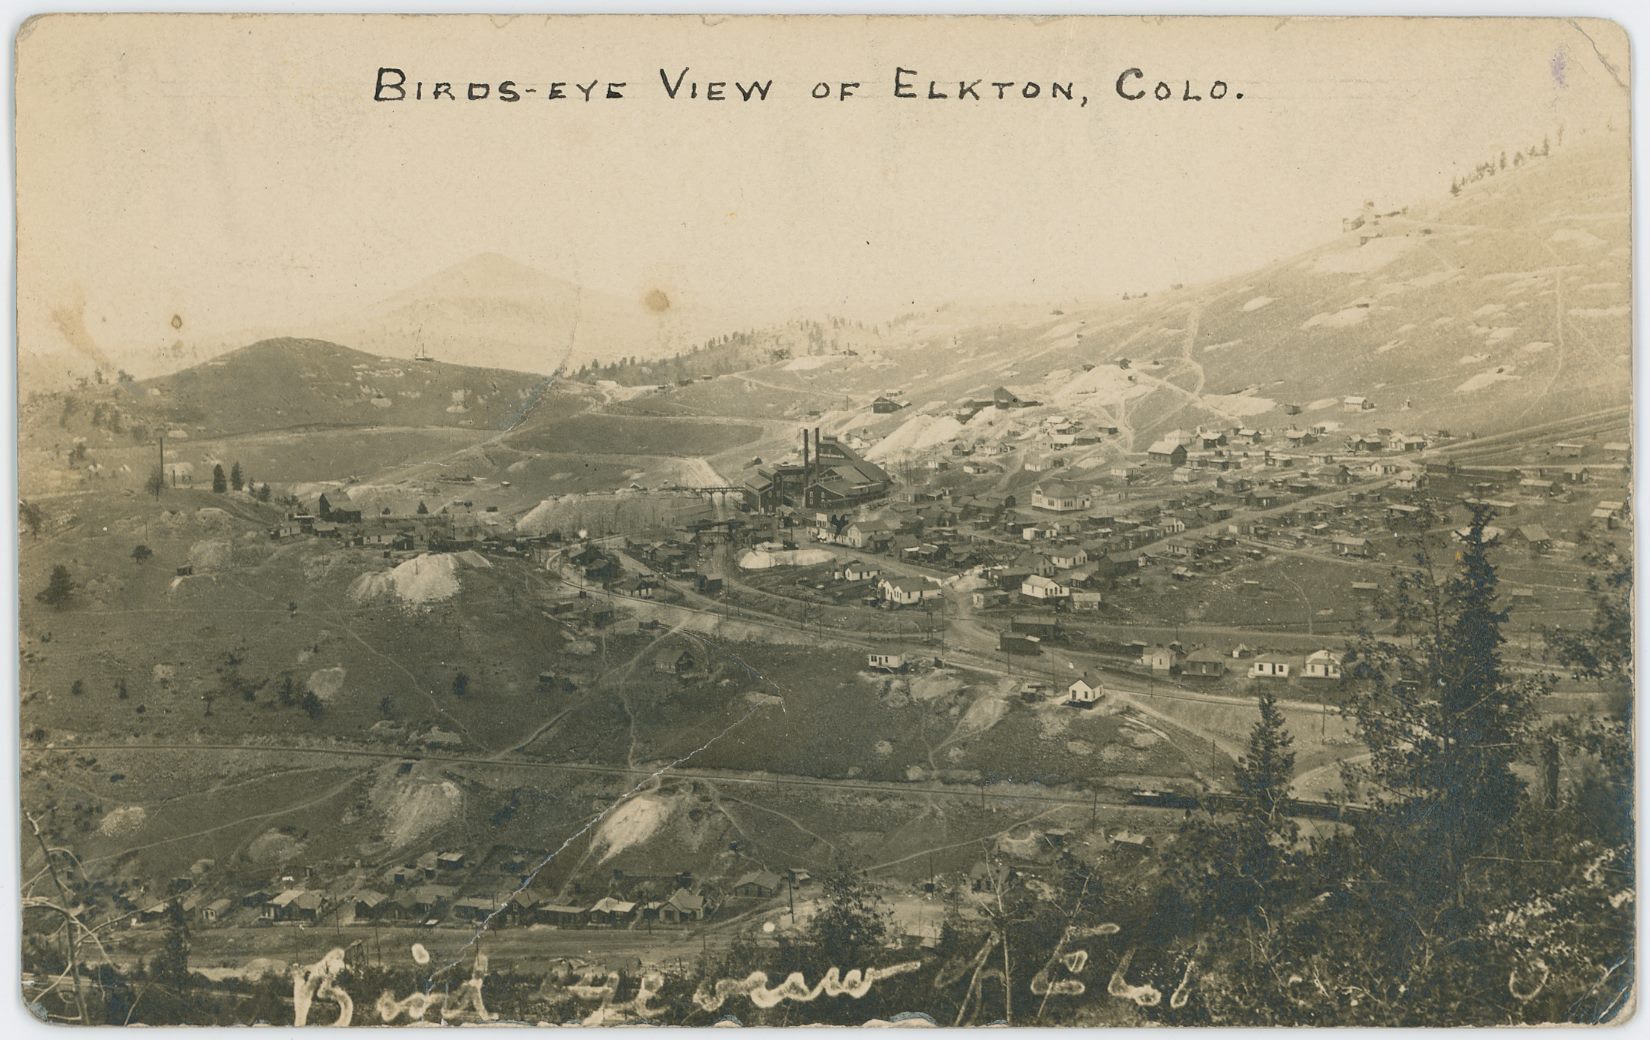 While the image quality is not that great due to the age and distance and all that, it still is a very important image to have! I struggle a little dating it as while it has a post stamp of 1908, I am unable to find the switchback from the M.T. up to the coal bins of Elkton Mine, which is shown on a USGS topographic map dated 1902/1903, which together with the showing of the Low Line which dates this after 1900, should narrow the timeframe down quite much, but the Elkton Mine structures gives me the impression this is way later then near 1900.
   This due to the fact Sanborn 1900 (CC Sheet 17) shows a different structure here, while photo matches better with Sanborn 1908 map (CC Sheet 30). But then again, that later map fails to show some of the mine structures seen here so that suggest this view predates it. And as my USGS map show a spur not here I must admit that this is from a timeframe of less than 3-years. More research is needed.
   Near bottom of this view lays a row of houses which forms the upper part of the settlement know as Eclipse, along Eclipse Gulch, stretching from about where F. & C.C. crosses the gulch and to around where the Economic Mill was further down the gulch at left, as far as I know.
   The grade of the F. & C.C. is seen about 1/4 up from the bottom, with a passenger train near right-hand side, heading towards Cripple Creek. There are several mine operations seen below and above that grade, but my knowledge is way too limited to tell anything about any of them.
   The town of Elkton is seen on the lower slope of Raven hill in the right-most half of the photo around middle of view top/down, where the large Elkton Mine makes up about center of this card, with the railroad grade of the M.T. running just left of the mine.
   The Low Line is seen about 1/3 up from bottom near right-hand side, climbing the hill towards left and about middle top/down and about 1/3 in from left-hand side it changes directions and goes towards right, cross over the M.T. on trestle and passes the Elkton mine on the right side.
   The Thompson large Shaft House (I think) is seen about center of view top/down and about 1/5 in from left-hand side, sadly I don't know of any Sanborn map of this structure, not that I can recall at the time of this writing [08.08.2017].
   There is also another mine structure at right foreground of the Thompson, left of the Low Line grade, but I dare not guestimate a name for that mine, nor do I dare take a stab at the name of the ones seen inside the town of Elkton either. One is easy to spot, just right of the mainline of M.T. with a large dump area, the other is more hidden among houses, still with a dump though. One day I hope to learn all this, one day.
   Raven Hill has it shares of mines as well, but the one I sort of care about is the Bostwick Shaft House, seen about 1/3 down from top and slightly right of center of view sideways, up from right-hand side of the Elkton mine.